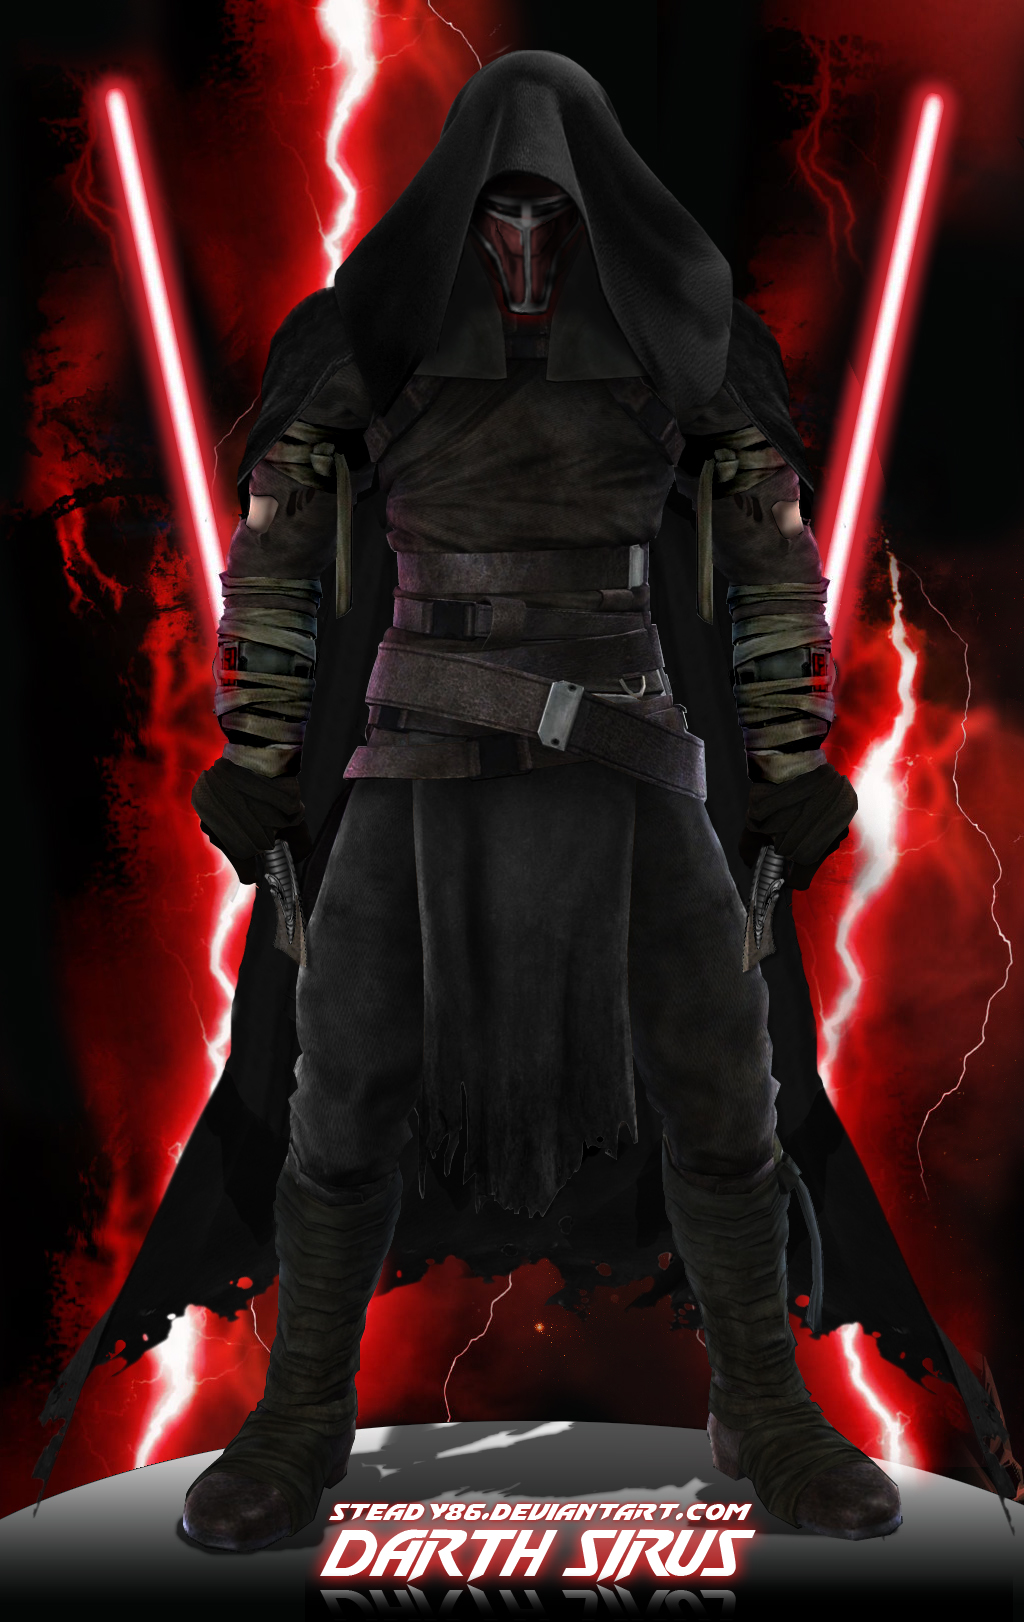 Darth_Sirus_SITH_OUTFIT_by_STEADY86.jpg